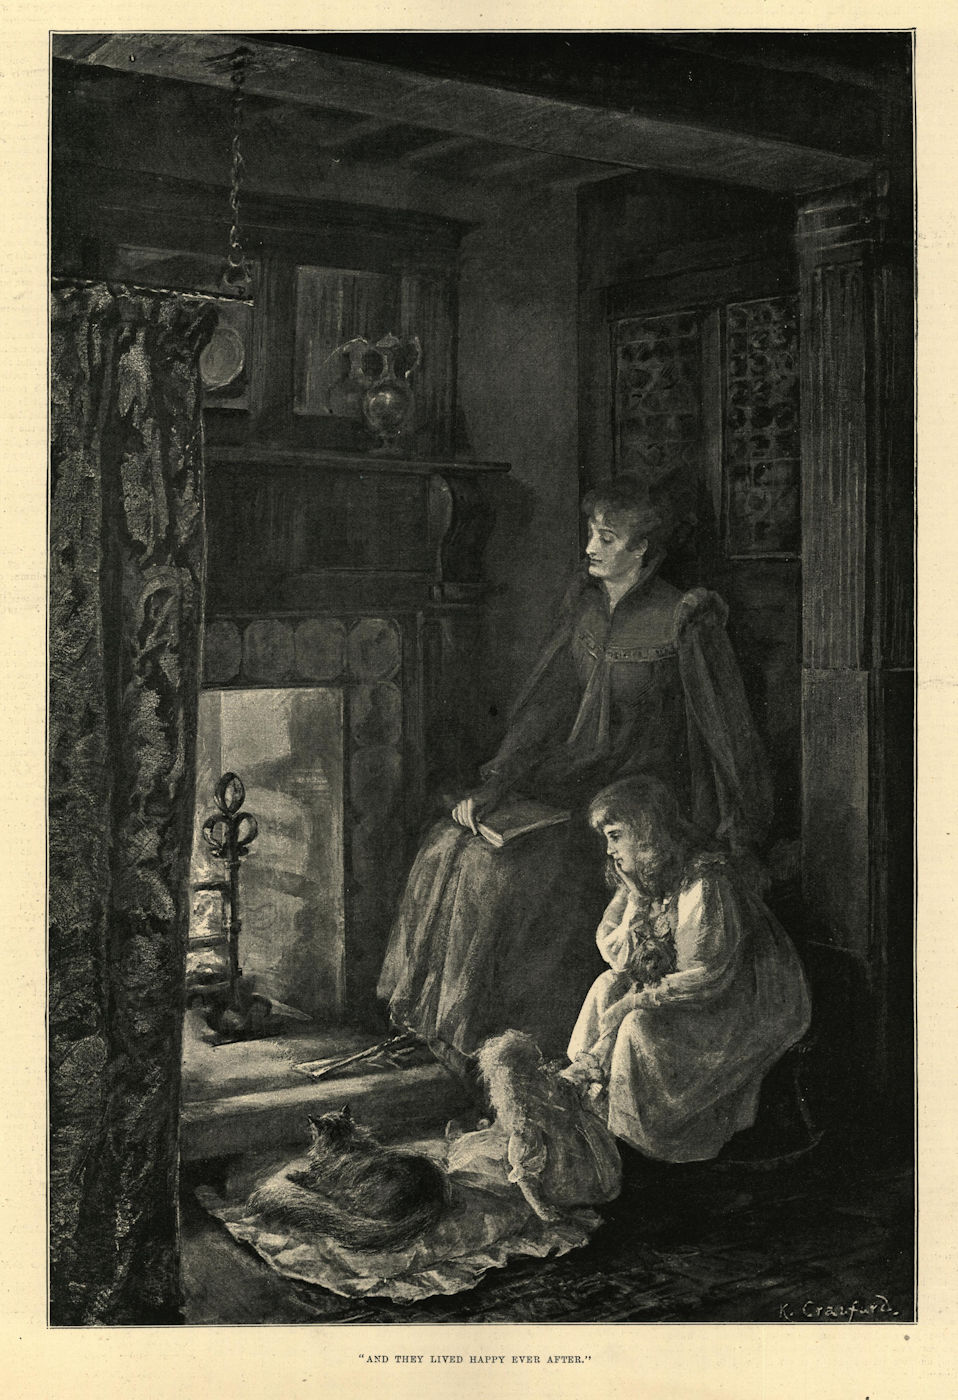 "And they lived happily ever after". Family fireplace 1892 old antique print